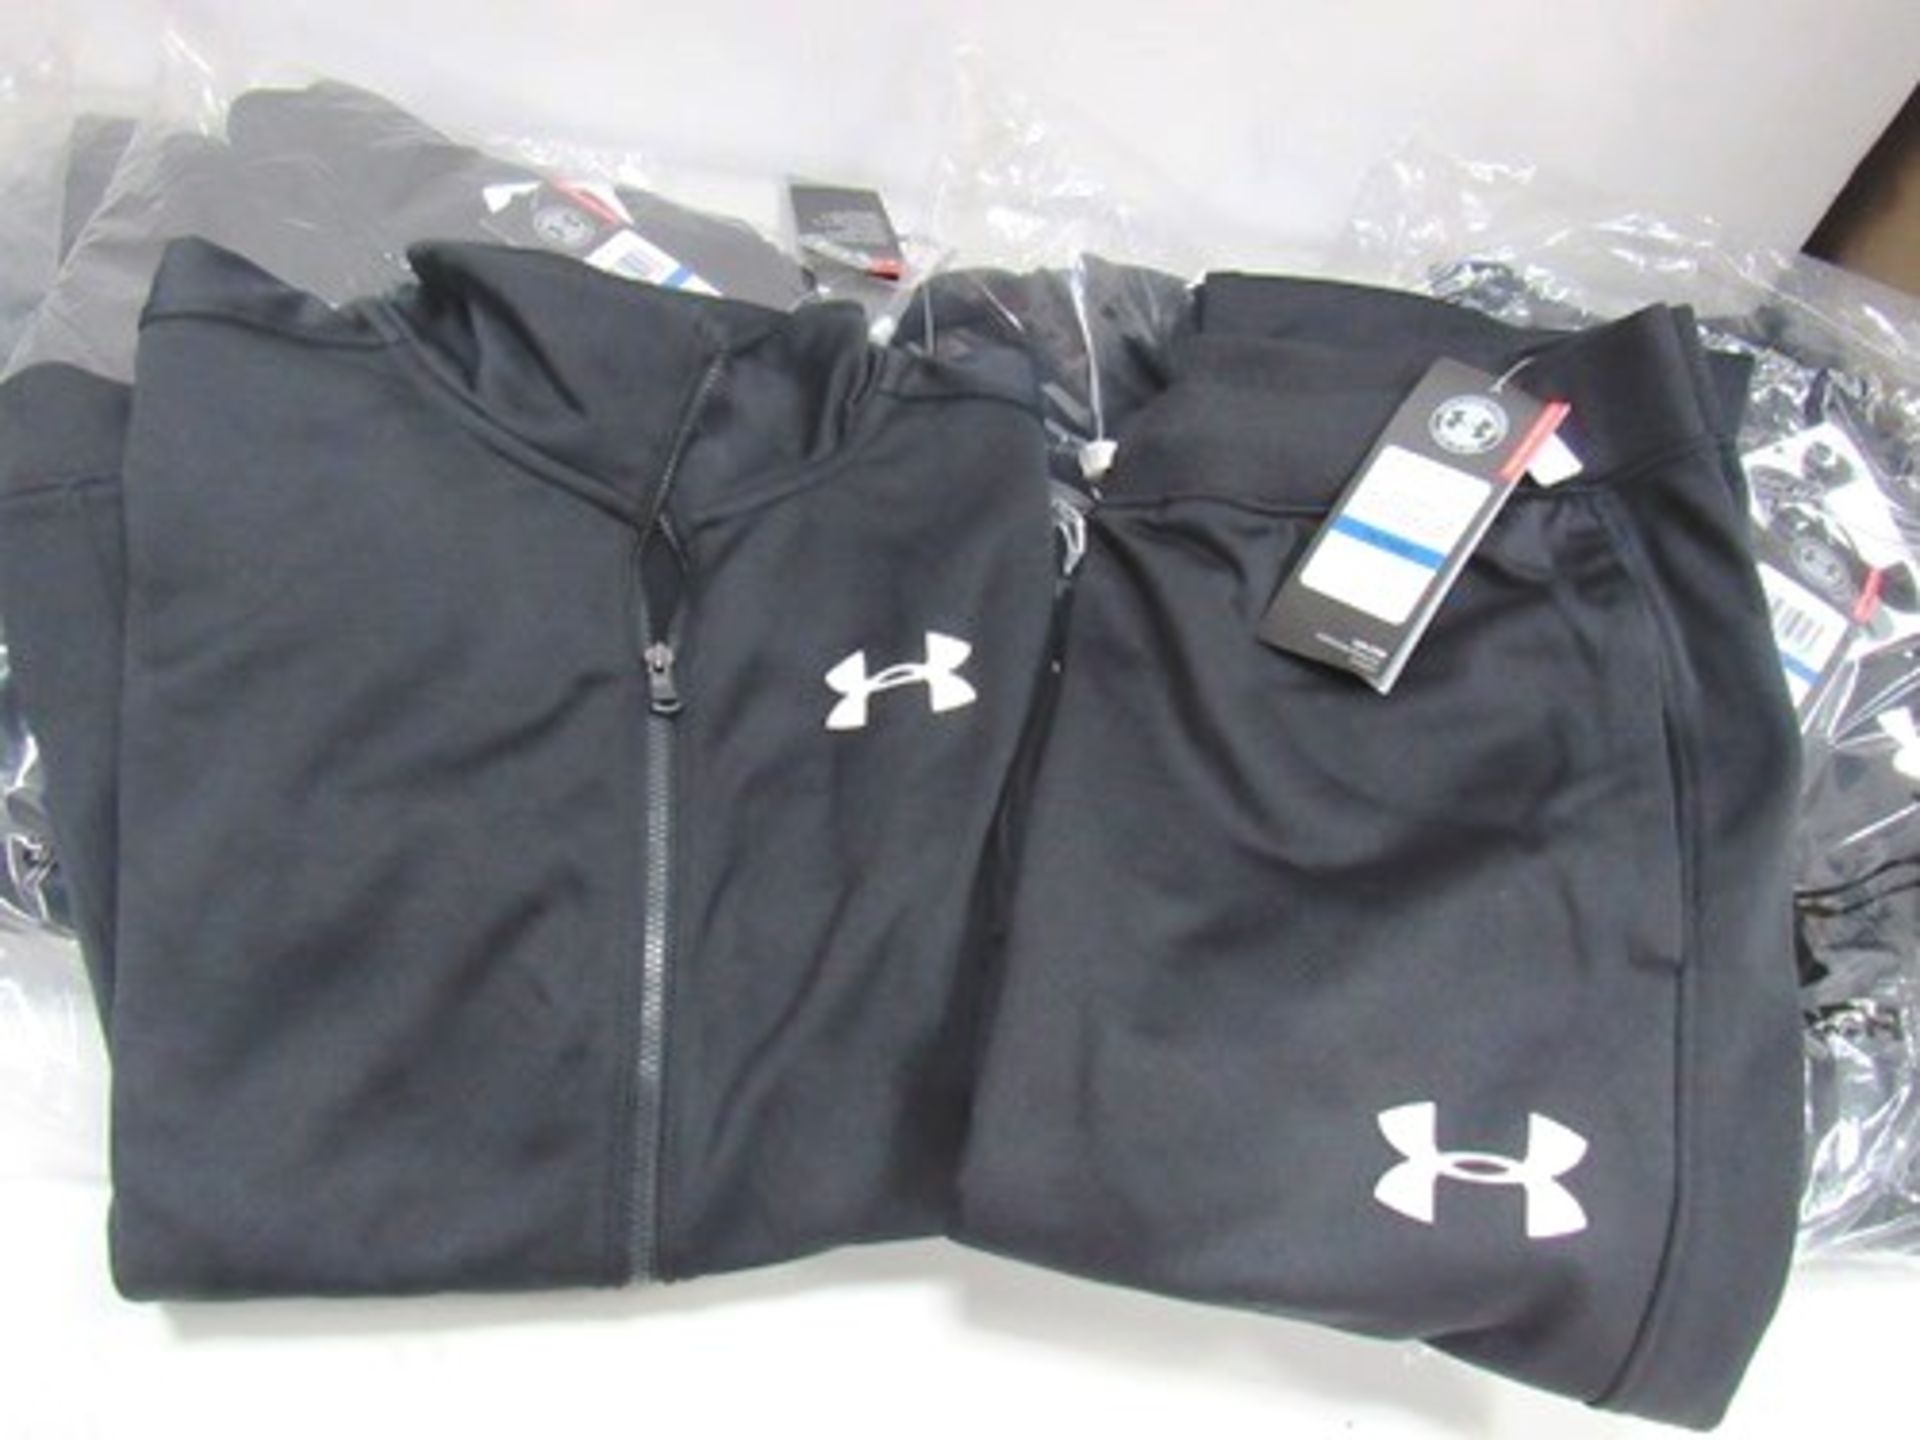 5 x Under Armour tracksuit sets, size Junior XL - Sealed new in pack (1B)